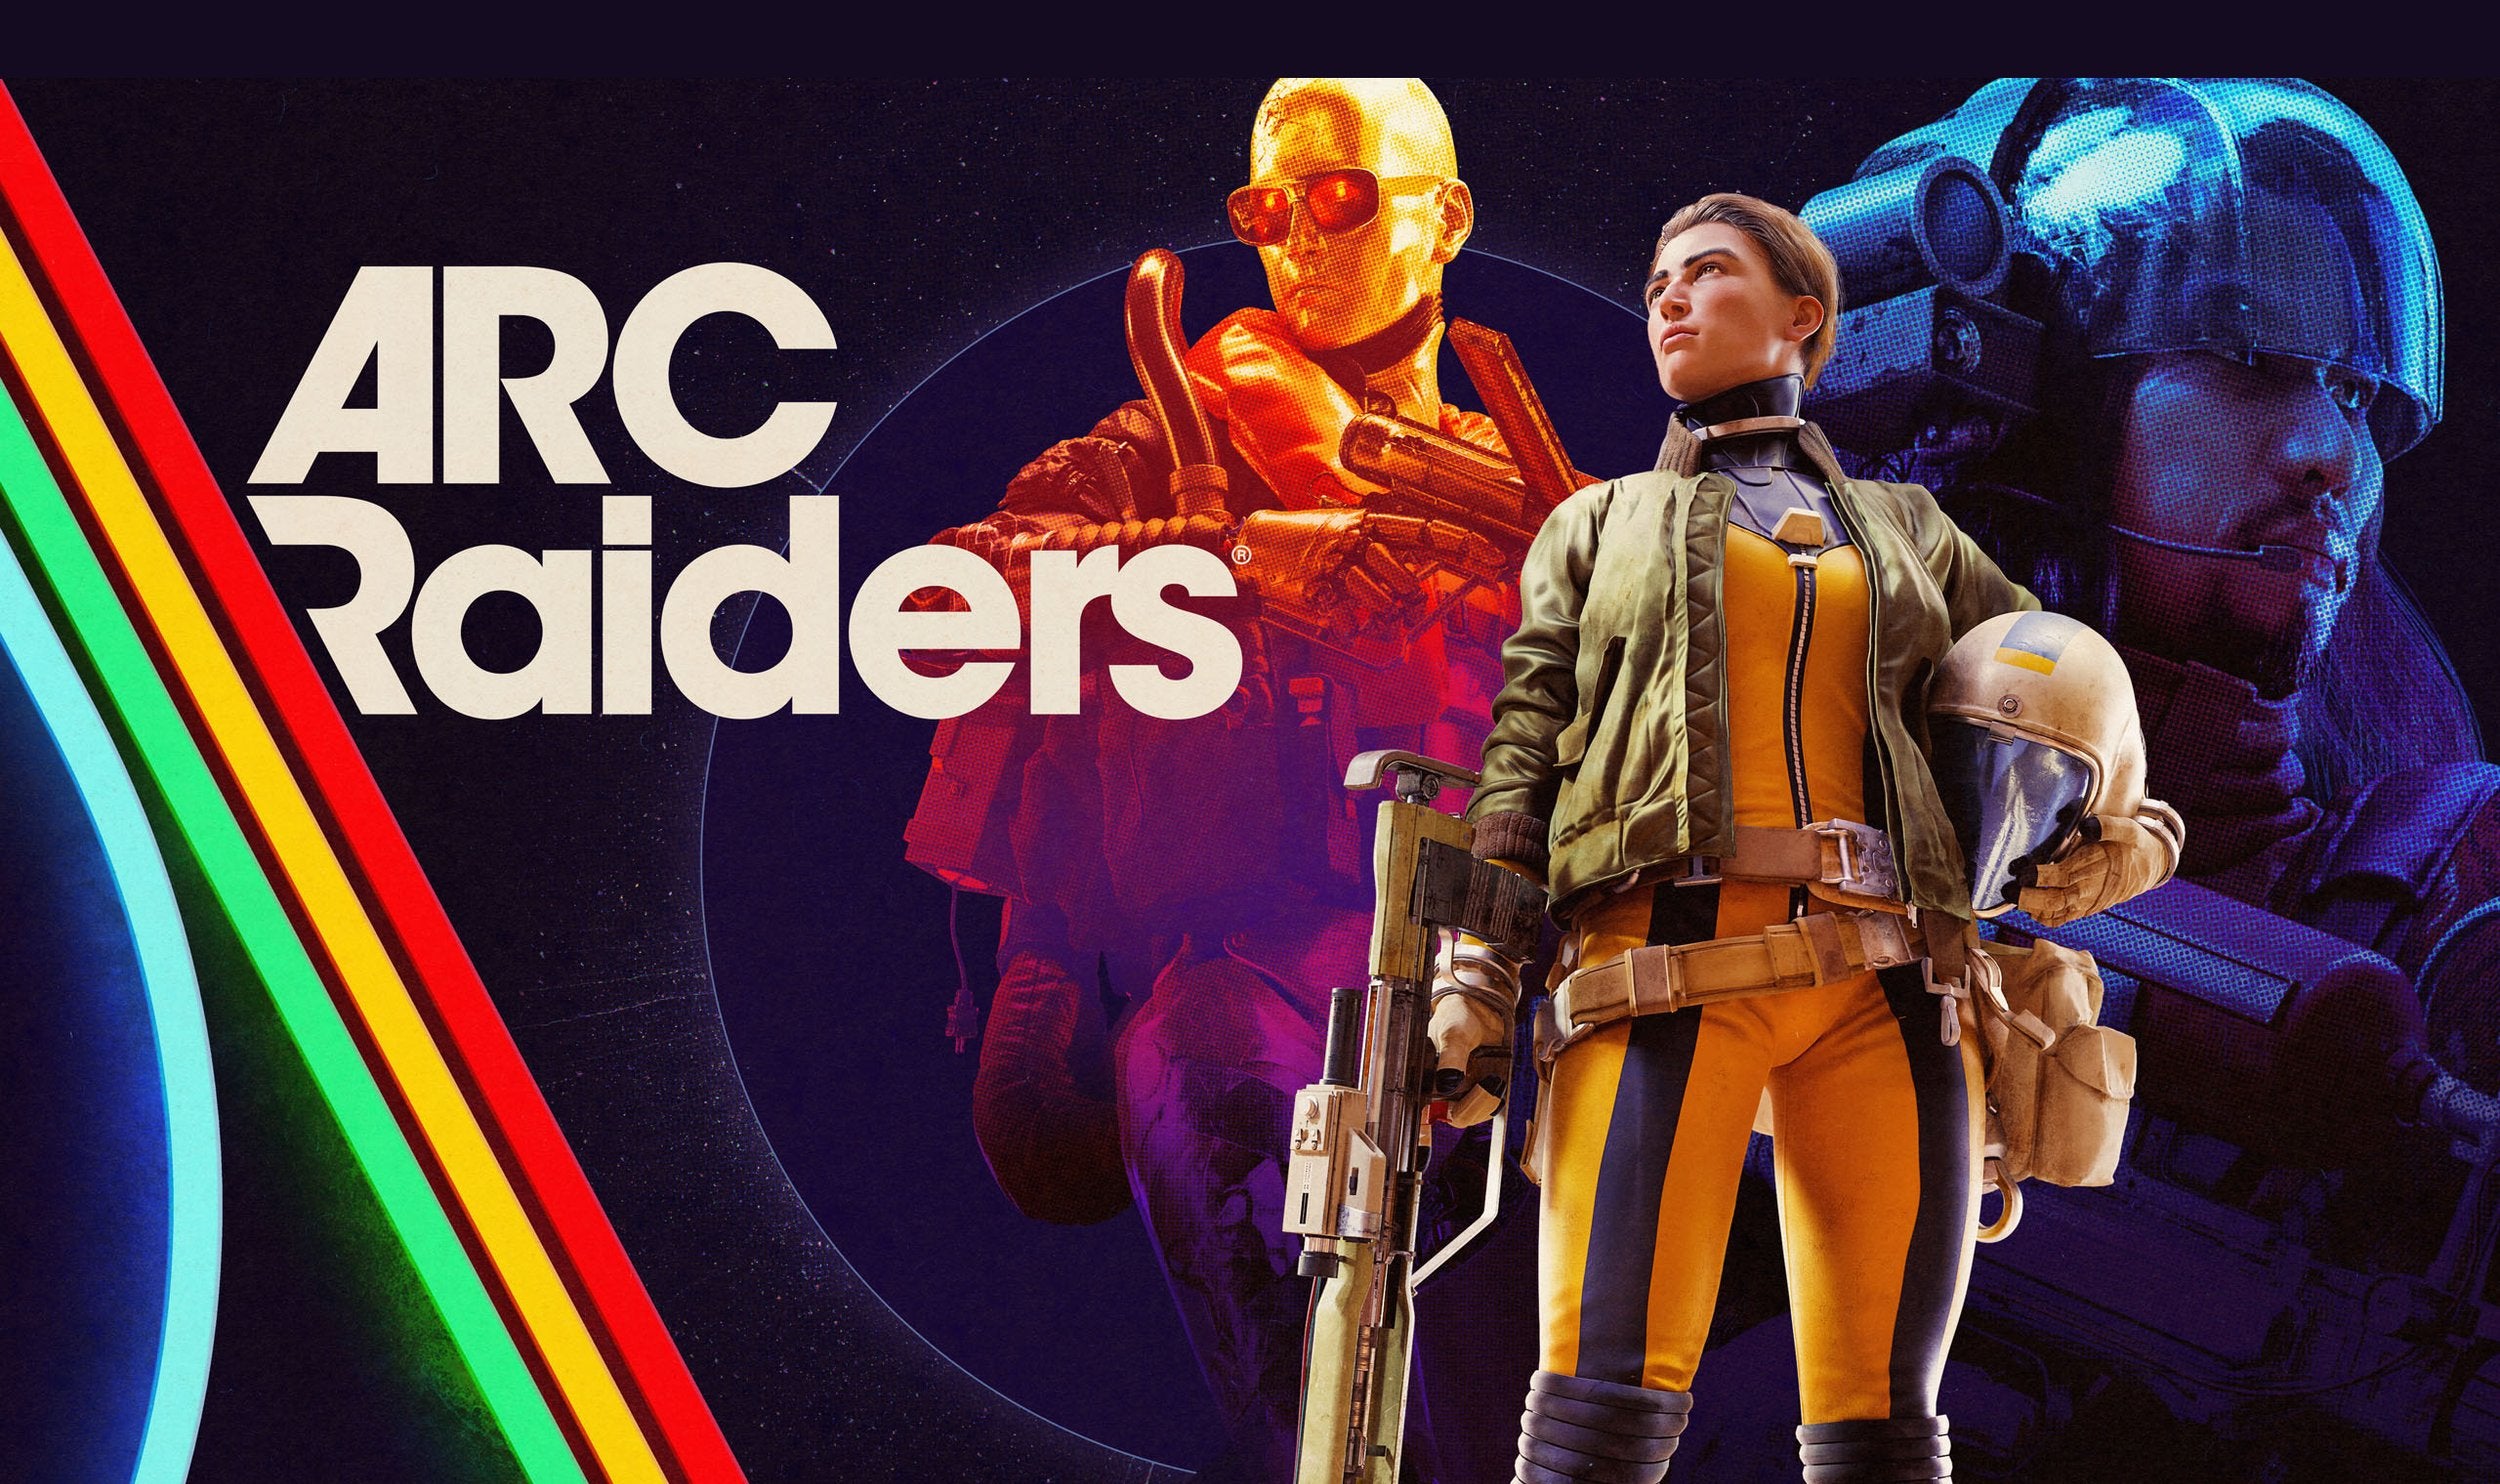 Image for Cooperative shooter Arc Raiders from former EA dev revealed at The Game Awards